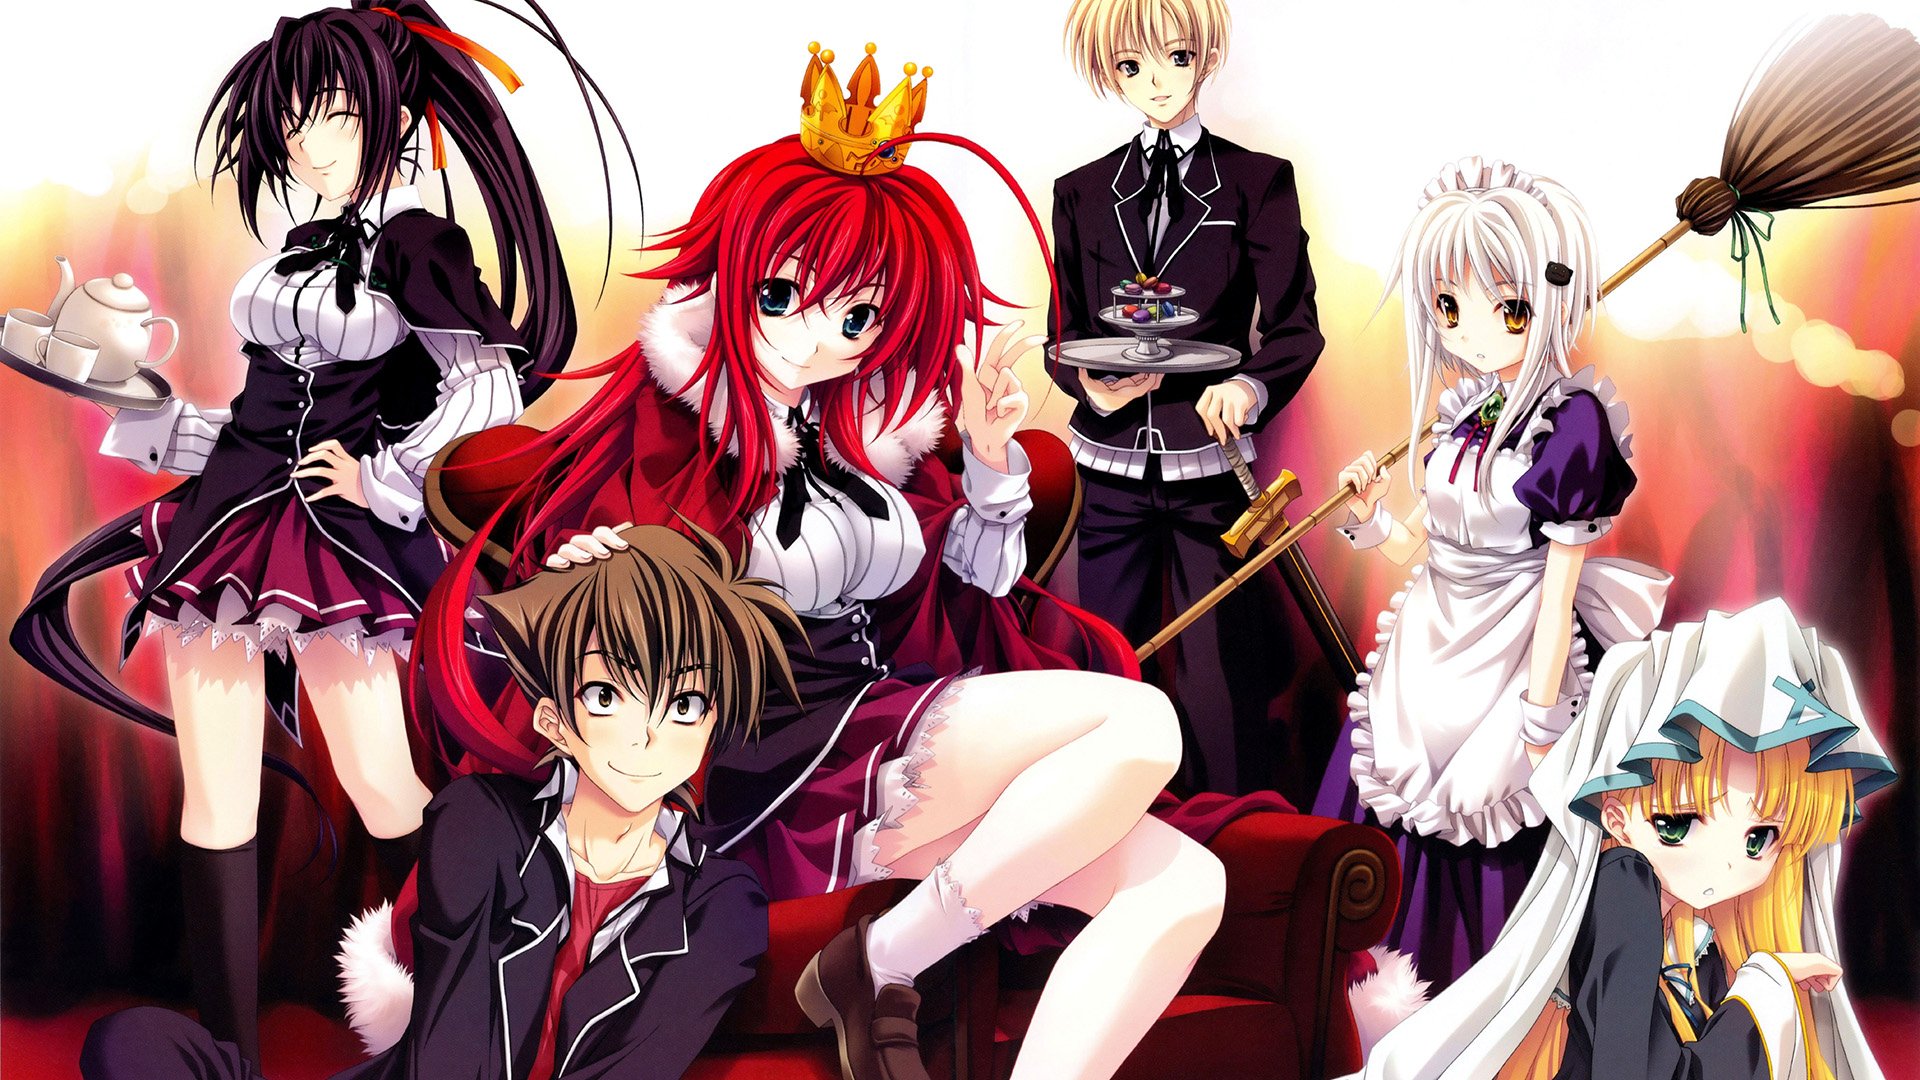 25+] High School DxD 4K Wallpapers on